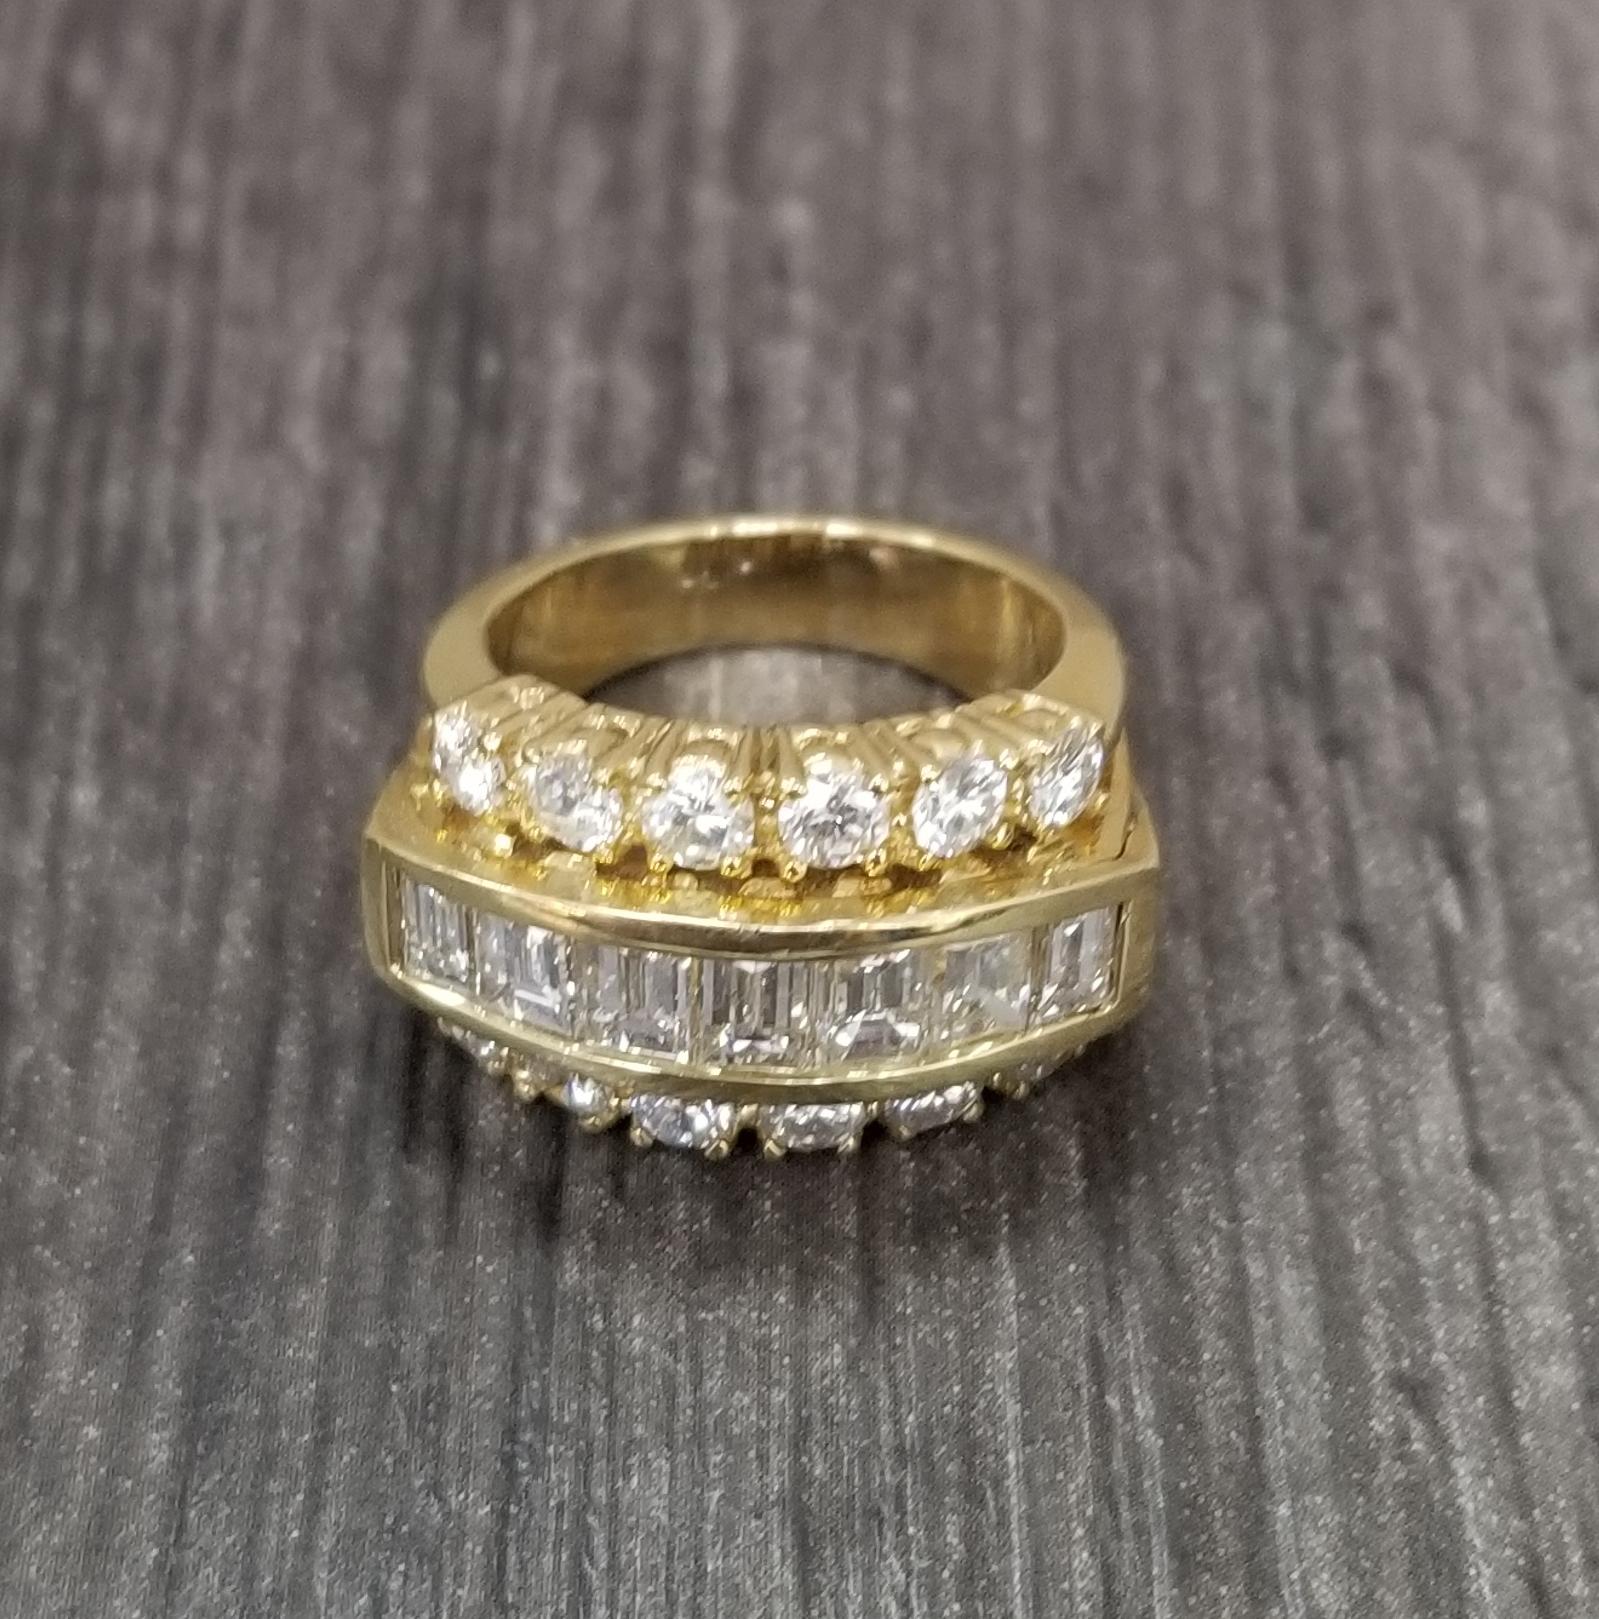 14k yellow gold 3 row diamond wedding ring, containing 7 baguette cut diamond weighing 1.00cts. and 12 round full cut diamonds weighing 1.46cts.; color 